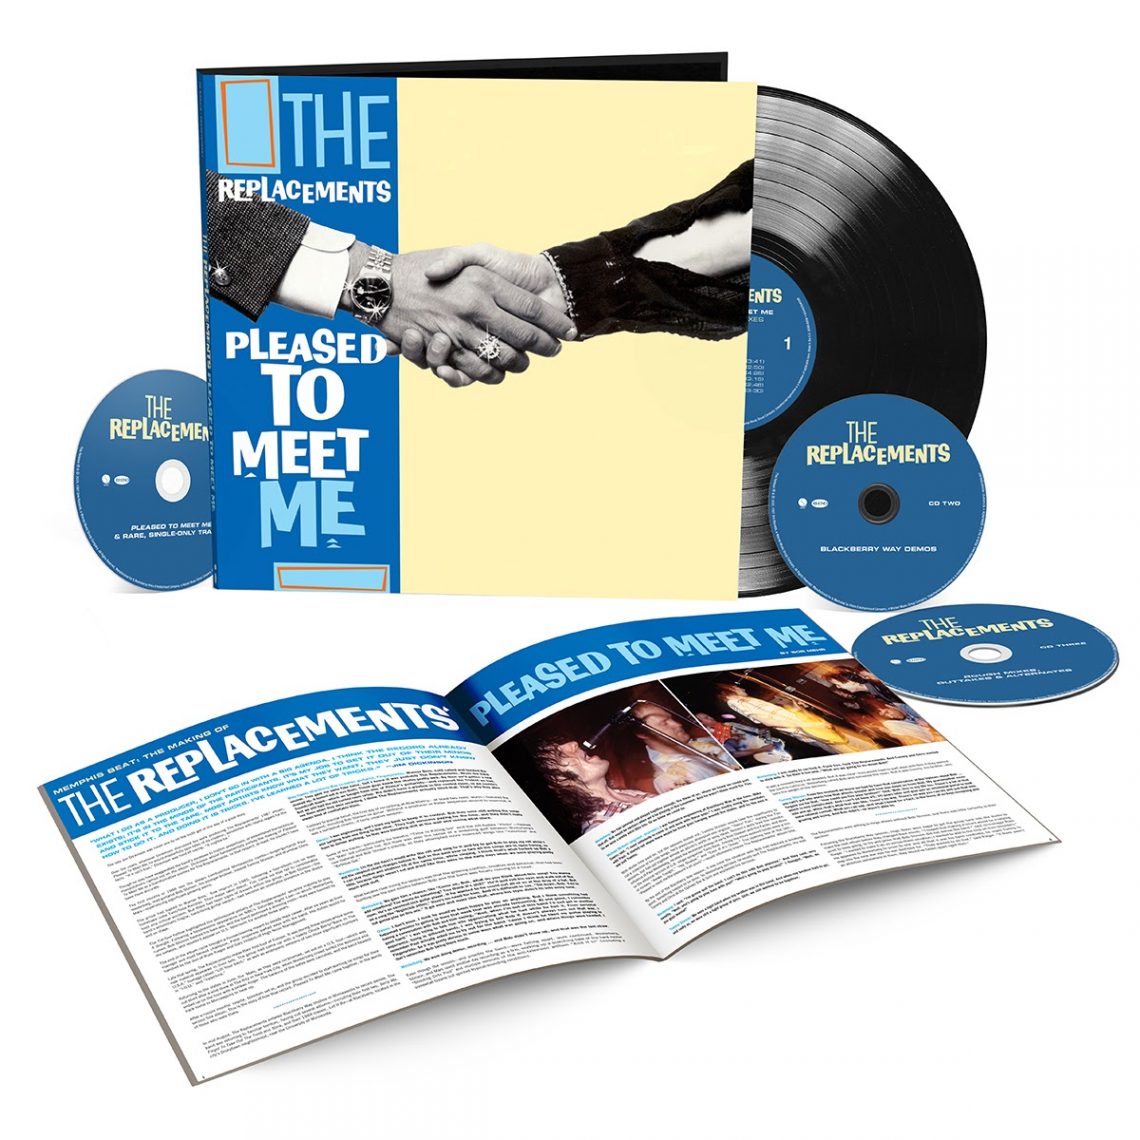 The Replacements ‘Pleased To Meet Me’ new boxed set